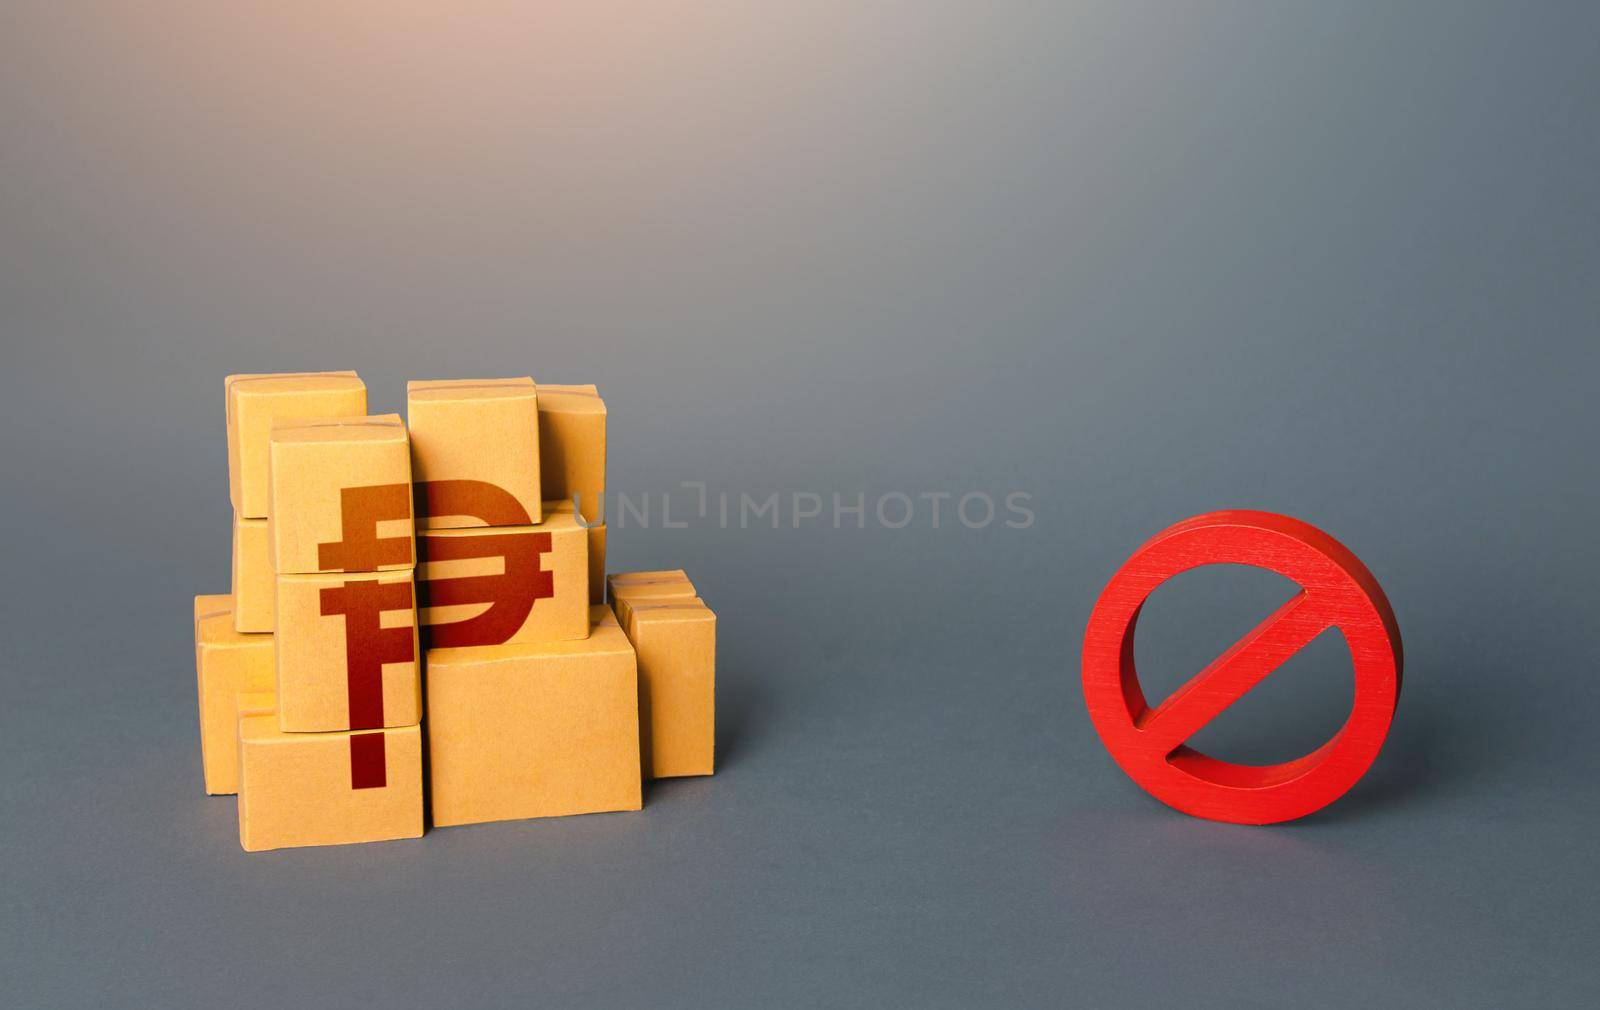 Philippine peso goods boxes and prohibition symbol NO. Ban on import goods. Impossibility of transportation. Sanctions and embargoes. Shortage of goods. Confiscation of contraband. Trade wars.